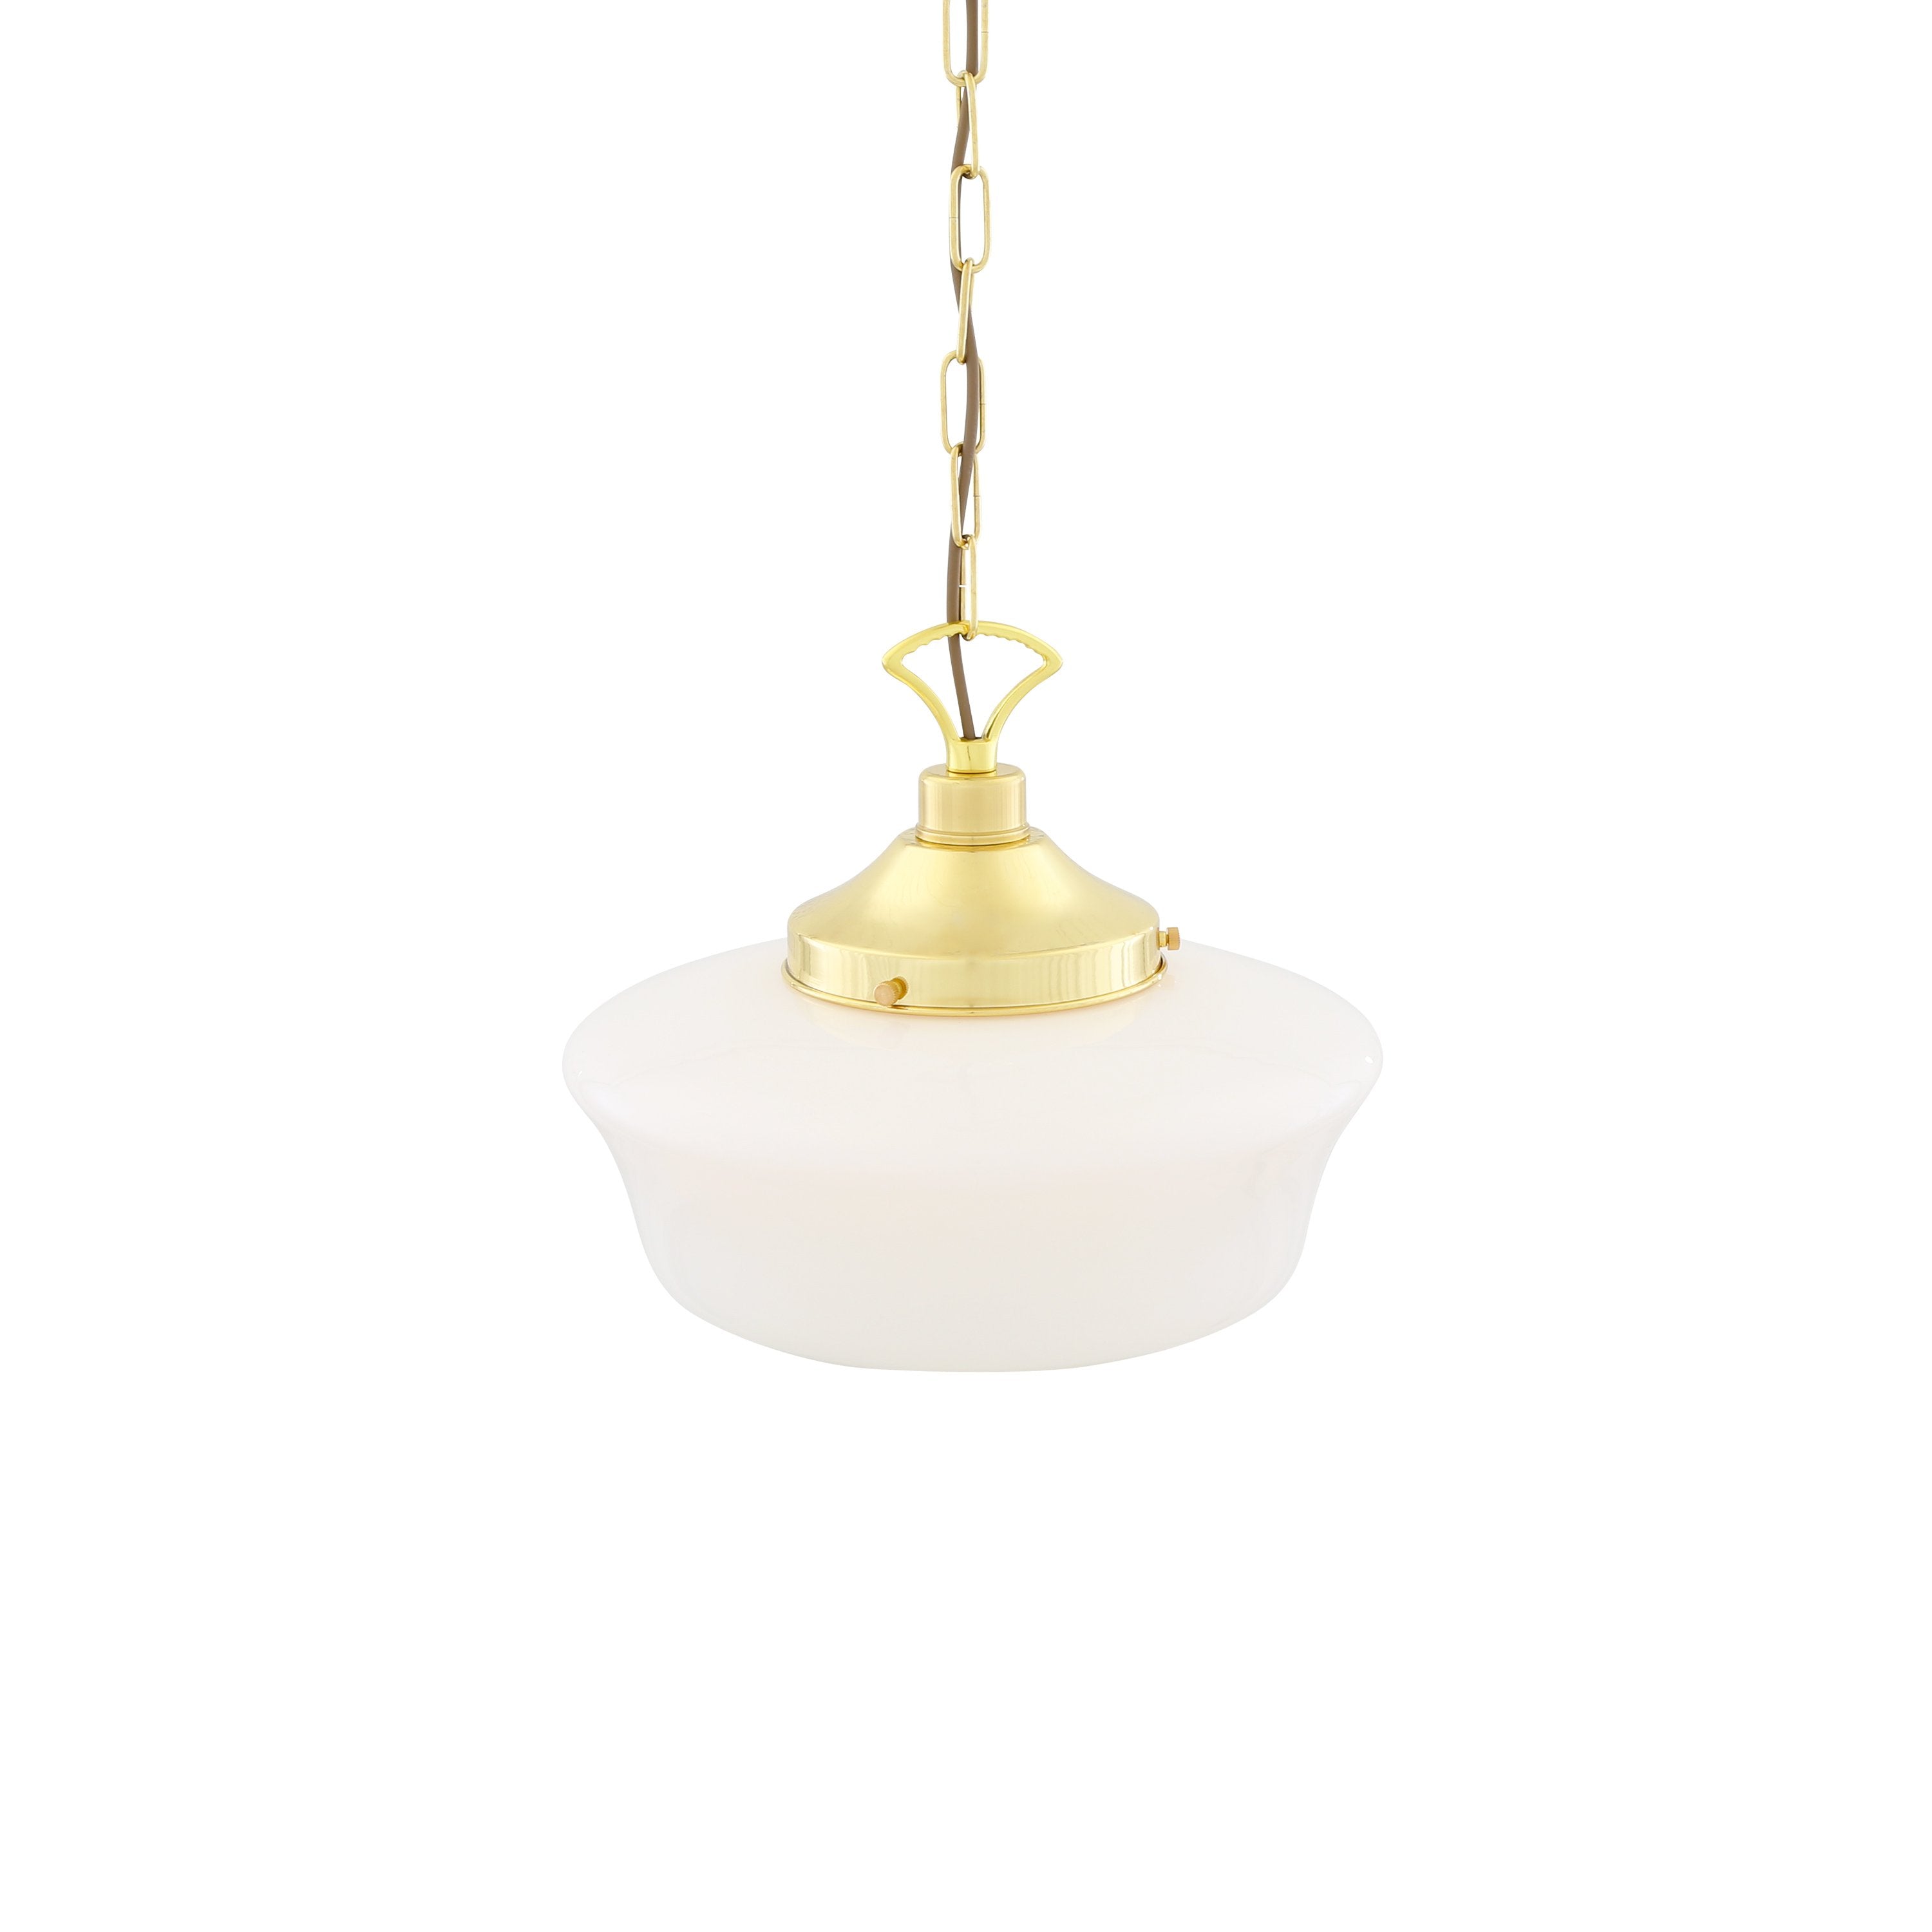 The Classic Schoolhouse pendant has a opal shade that cast soft ambient light. 